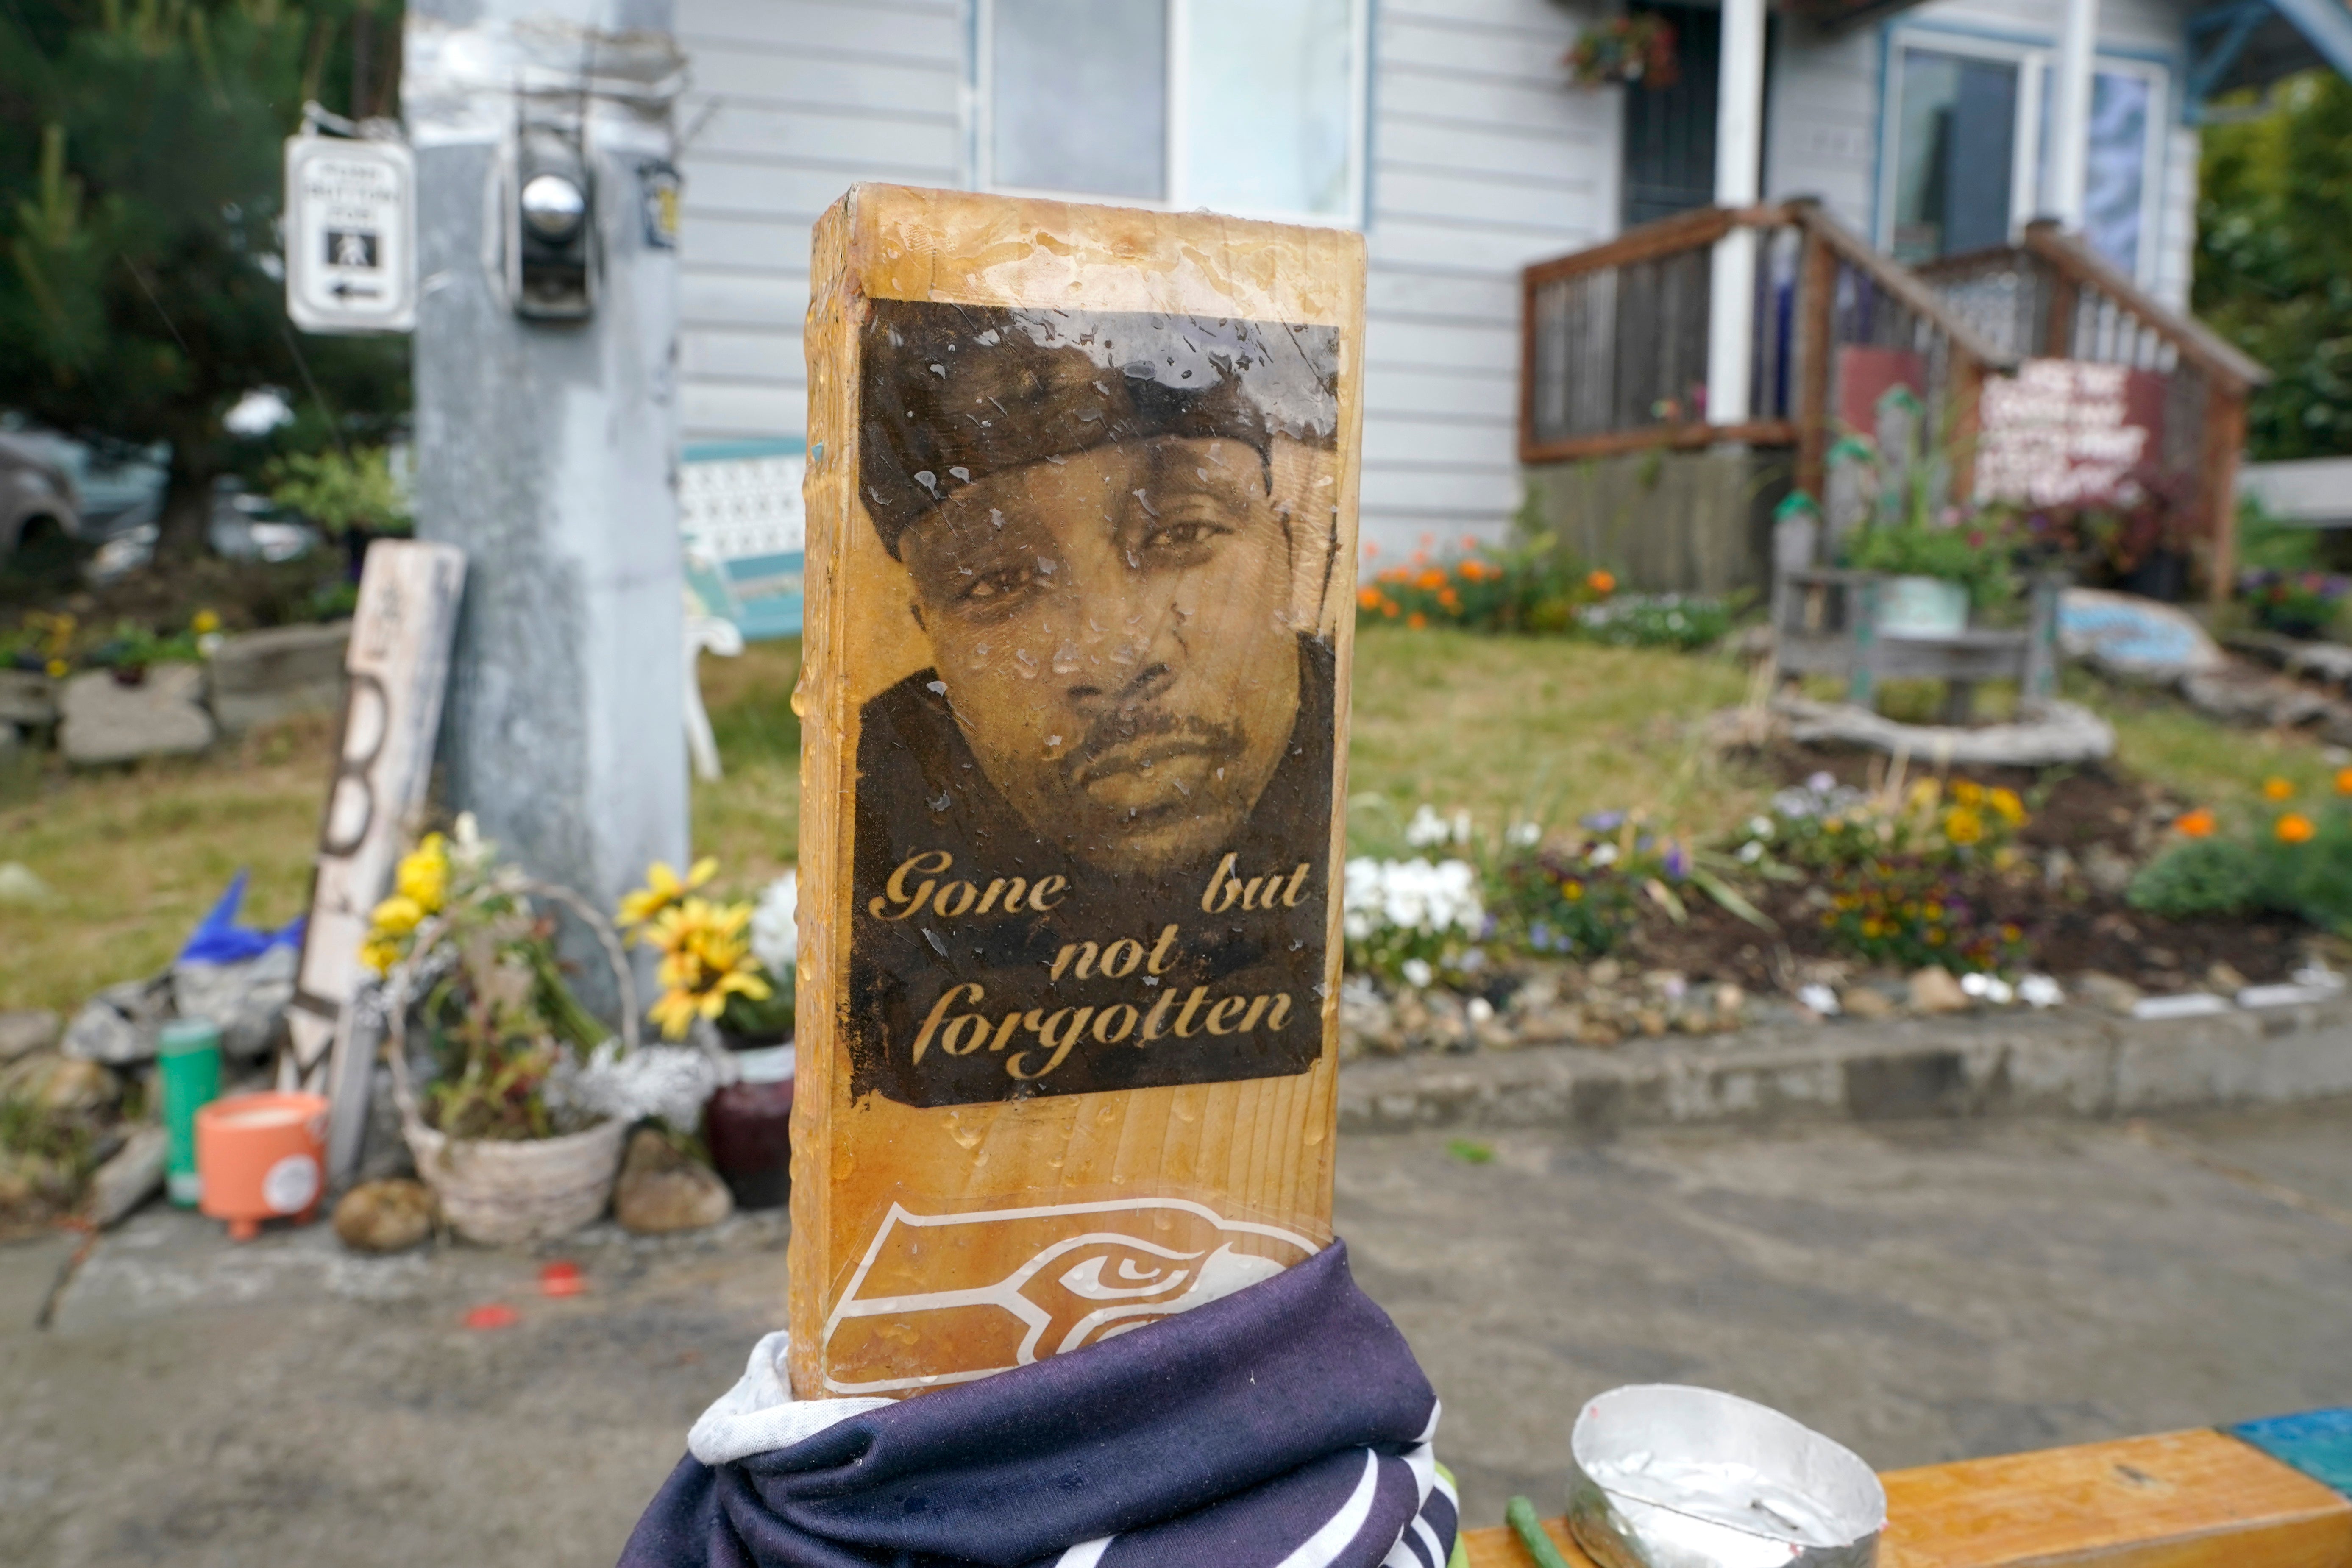 A sign is displayed at a memorial in Tacoma, Washington, where Manuel “Manny” Ellis died